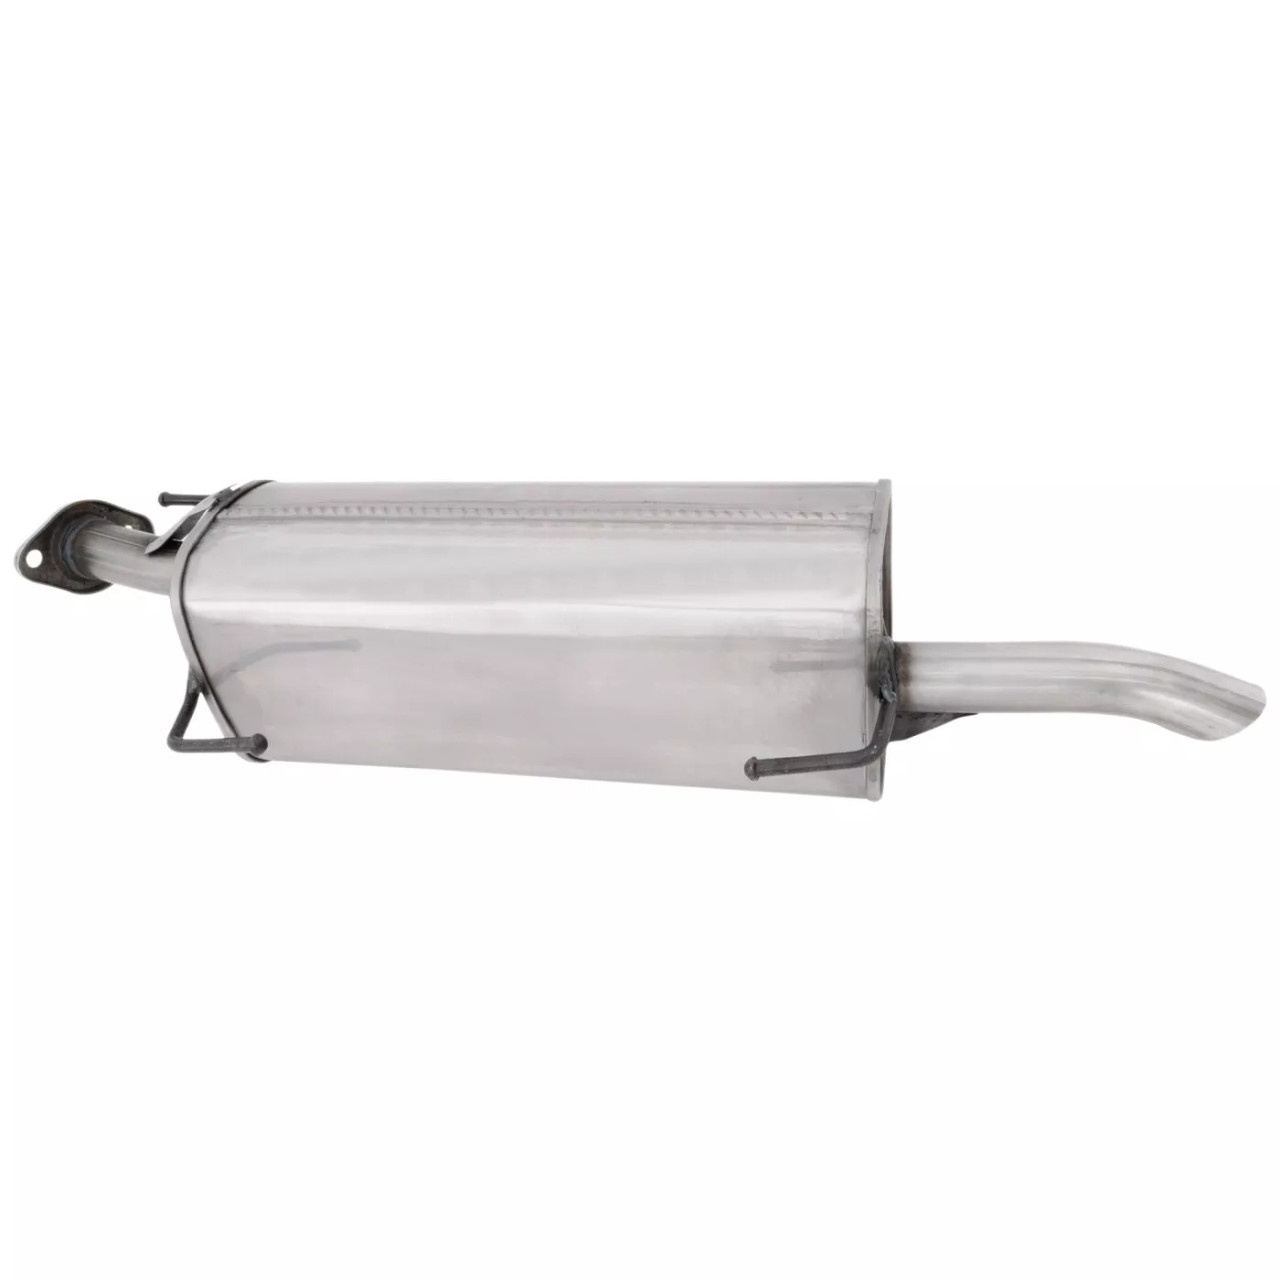 Muffler For 2007-2012 Nissan Versa Rear Stainless Steel 1.8L Eng 4 Cyl